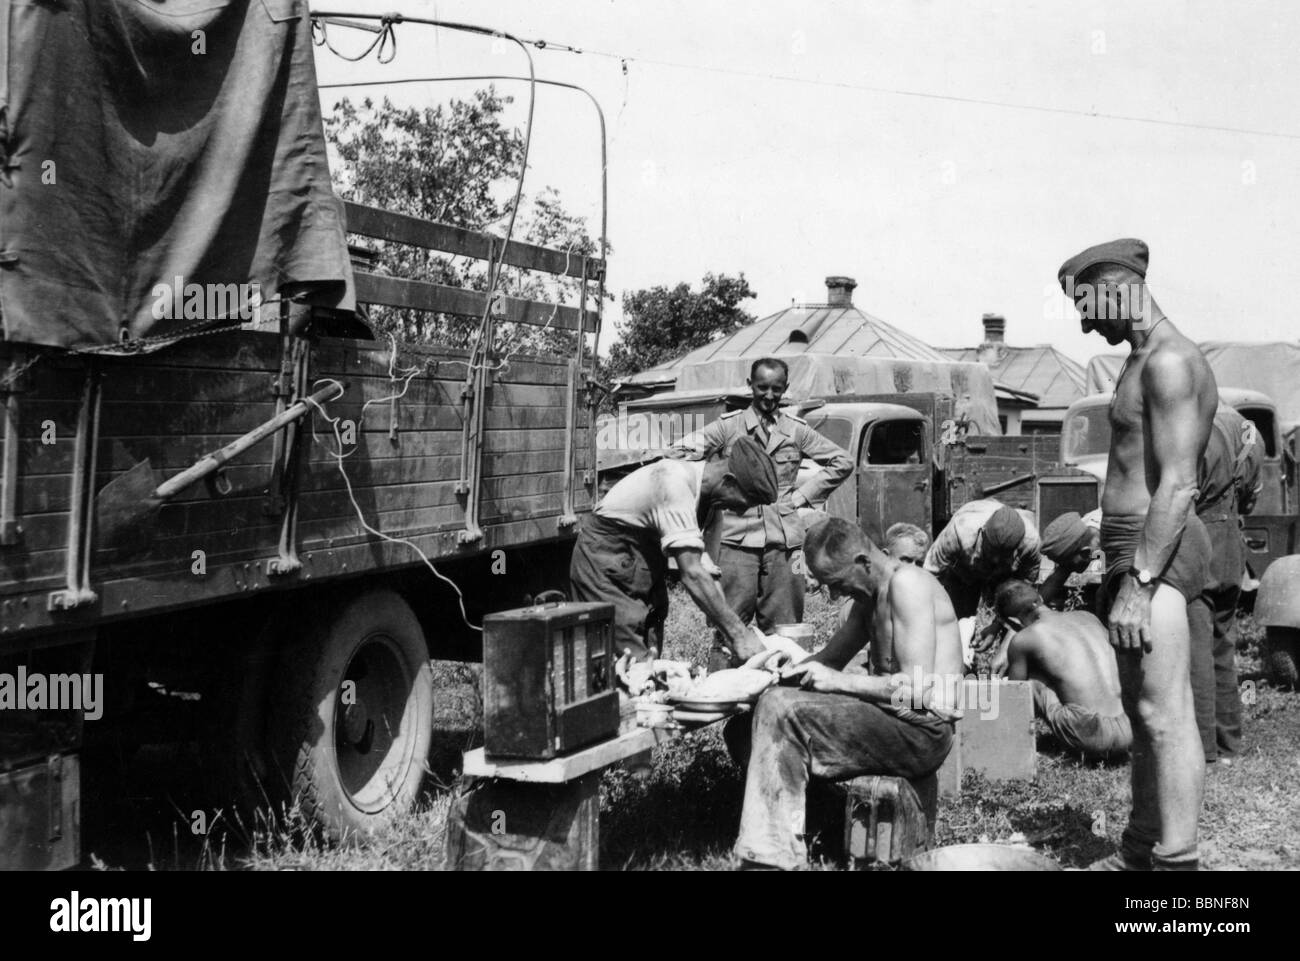 events, Second World War / WWII, Russia 1942 / 1943, soldiers of a German supply battalion in a village at the Kuban river, summer 1942, Wehrmacht, 20th century, historic, historical, supplies, unit, logistics, Third Reich, Soviet Union, USSR, baggage, Eastern Front, lorry, lorries, radio, plucking poultry, occupation, people, 1940s, Stock Photo